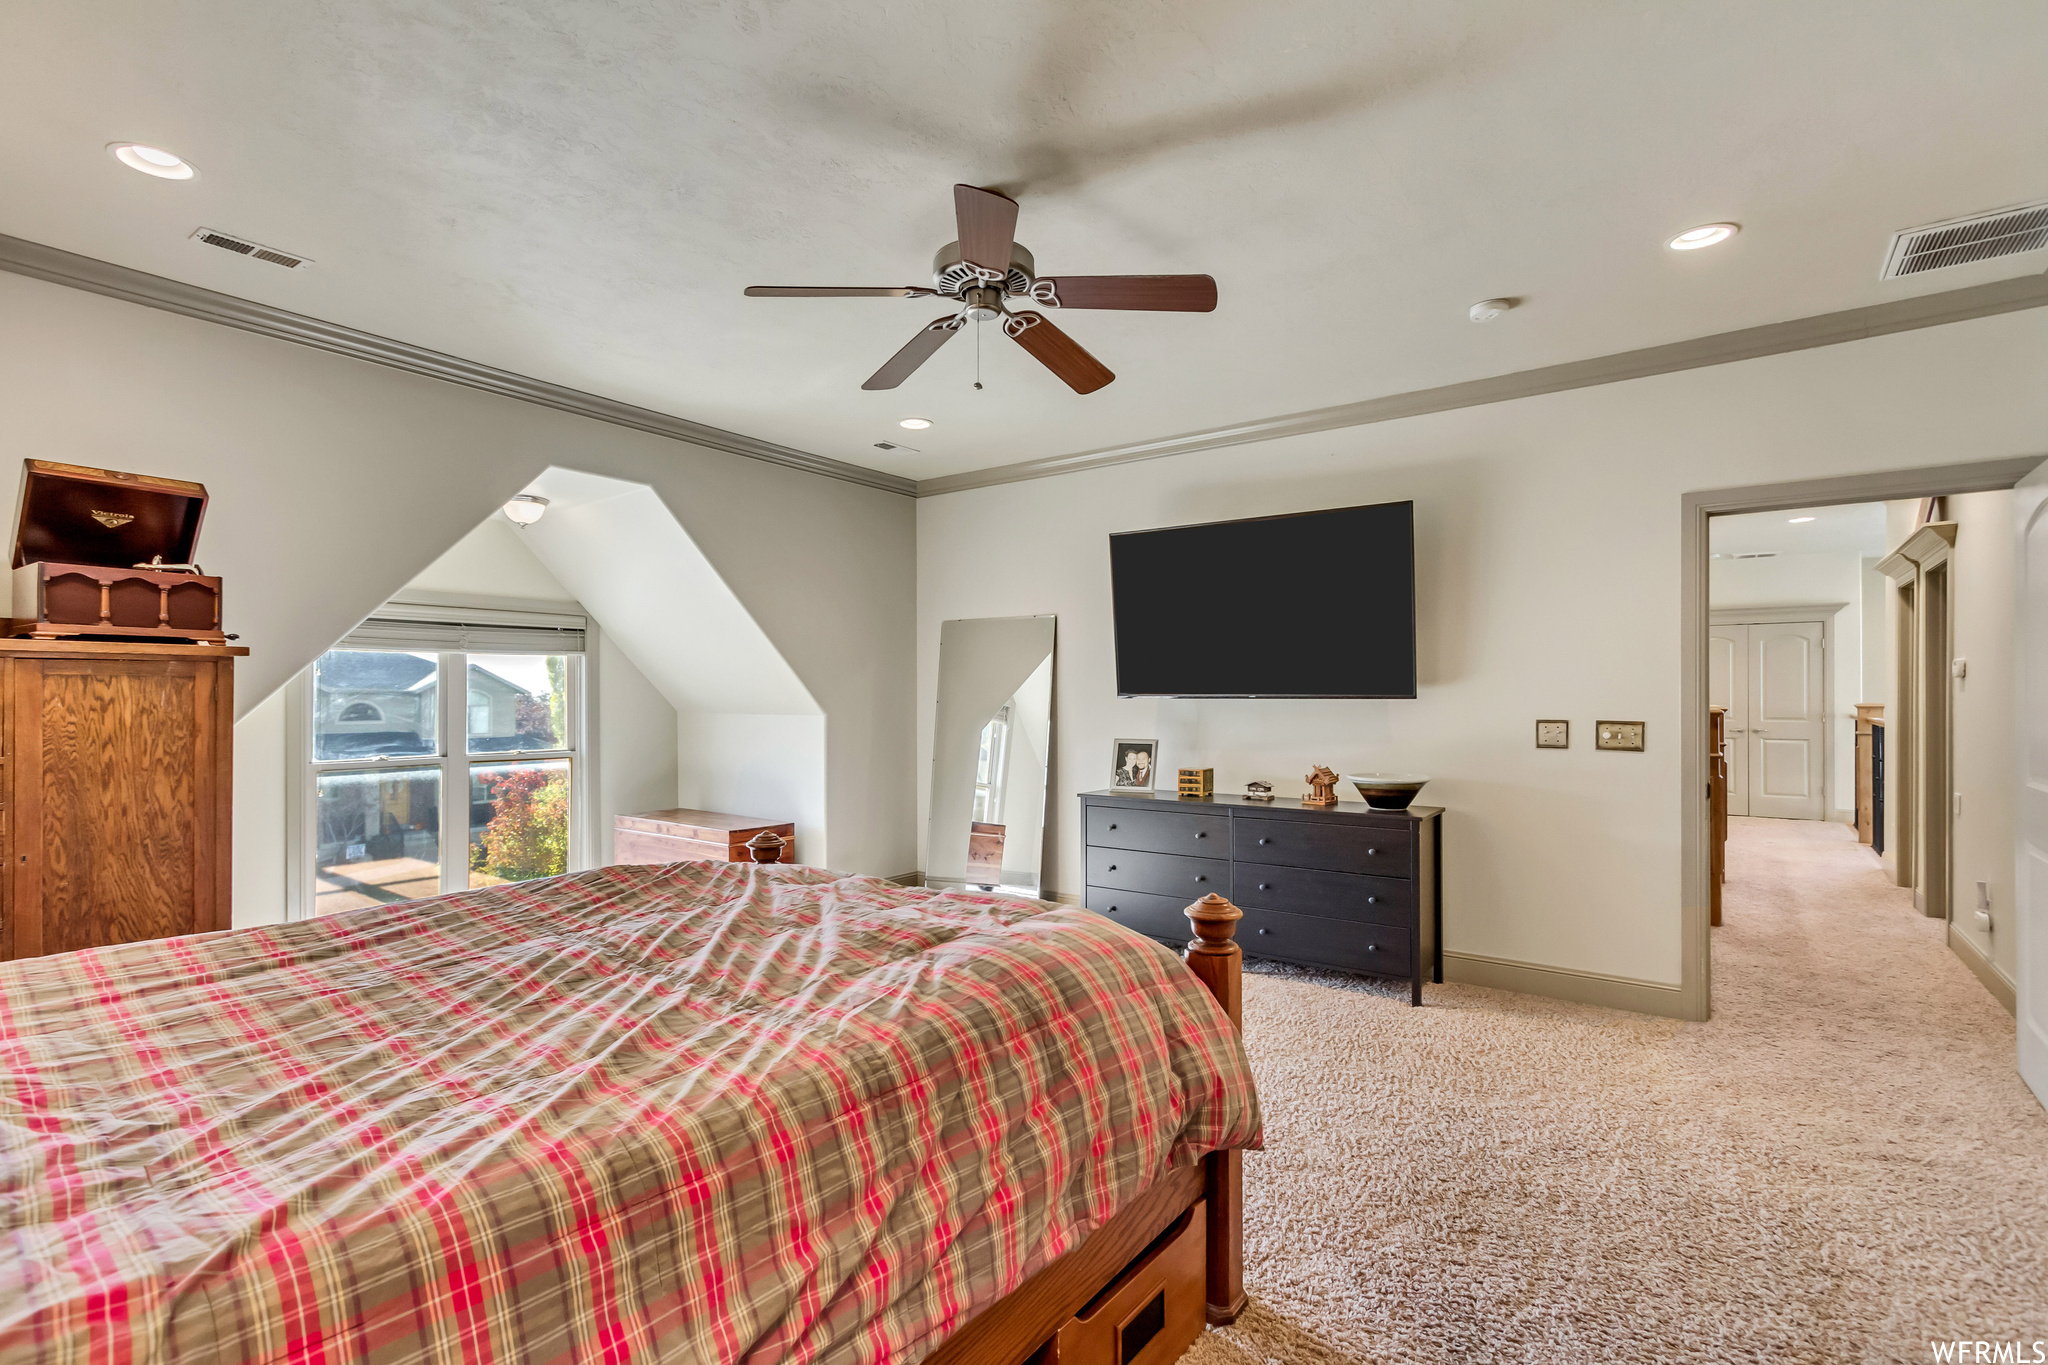 Bedroom featuring ceiling fan, light carpet, and crown molding